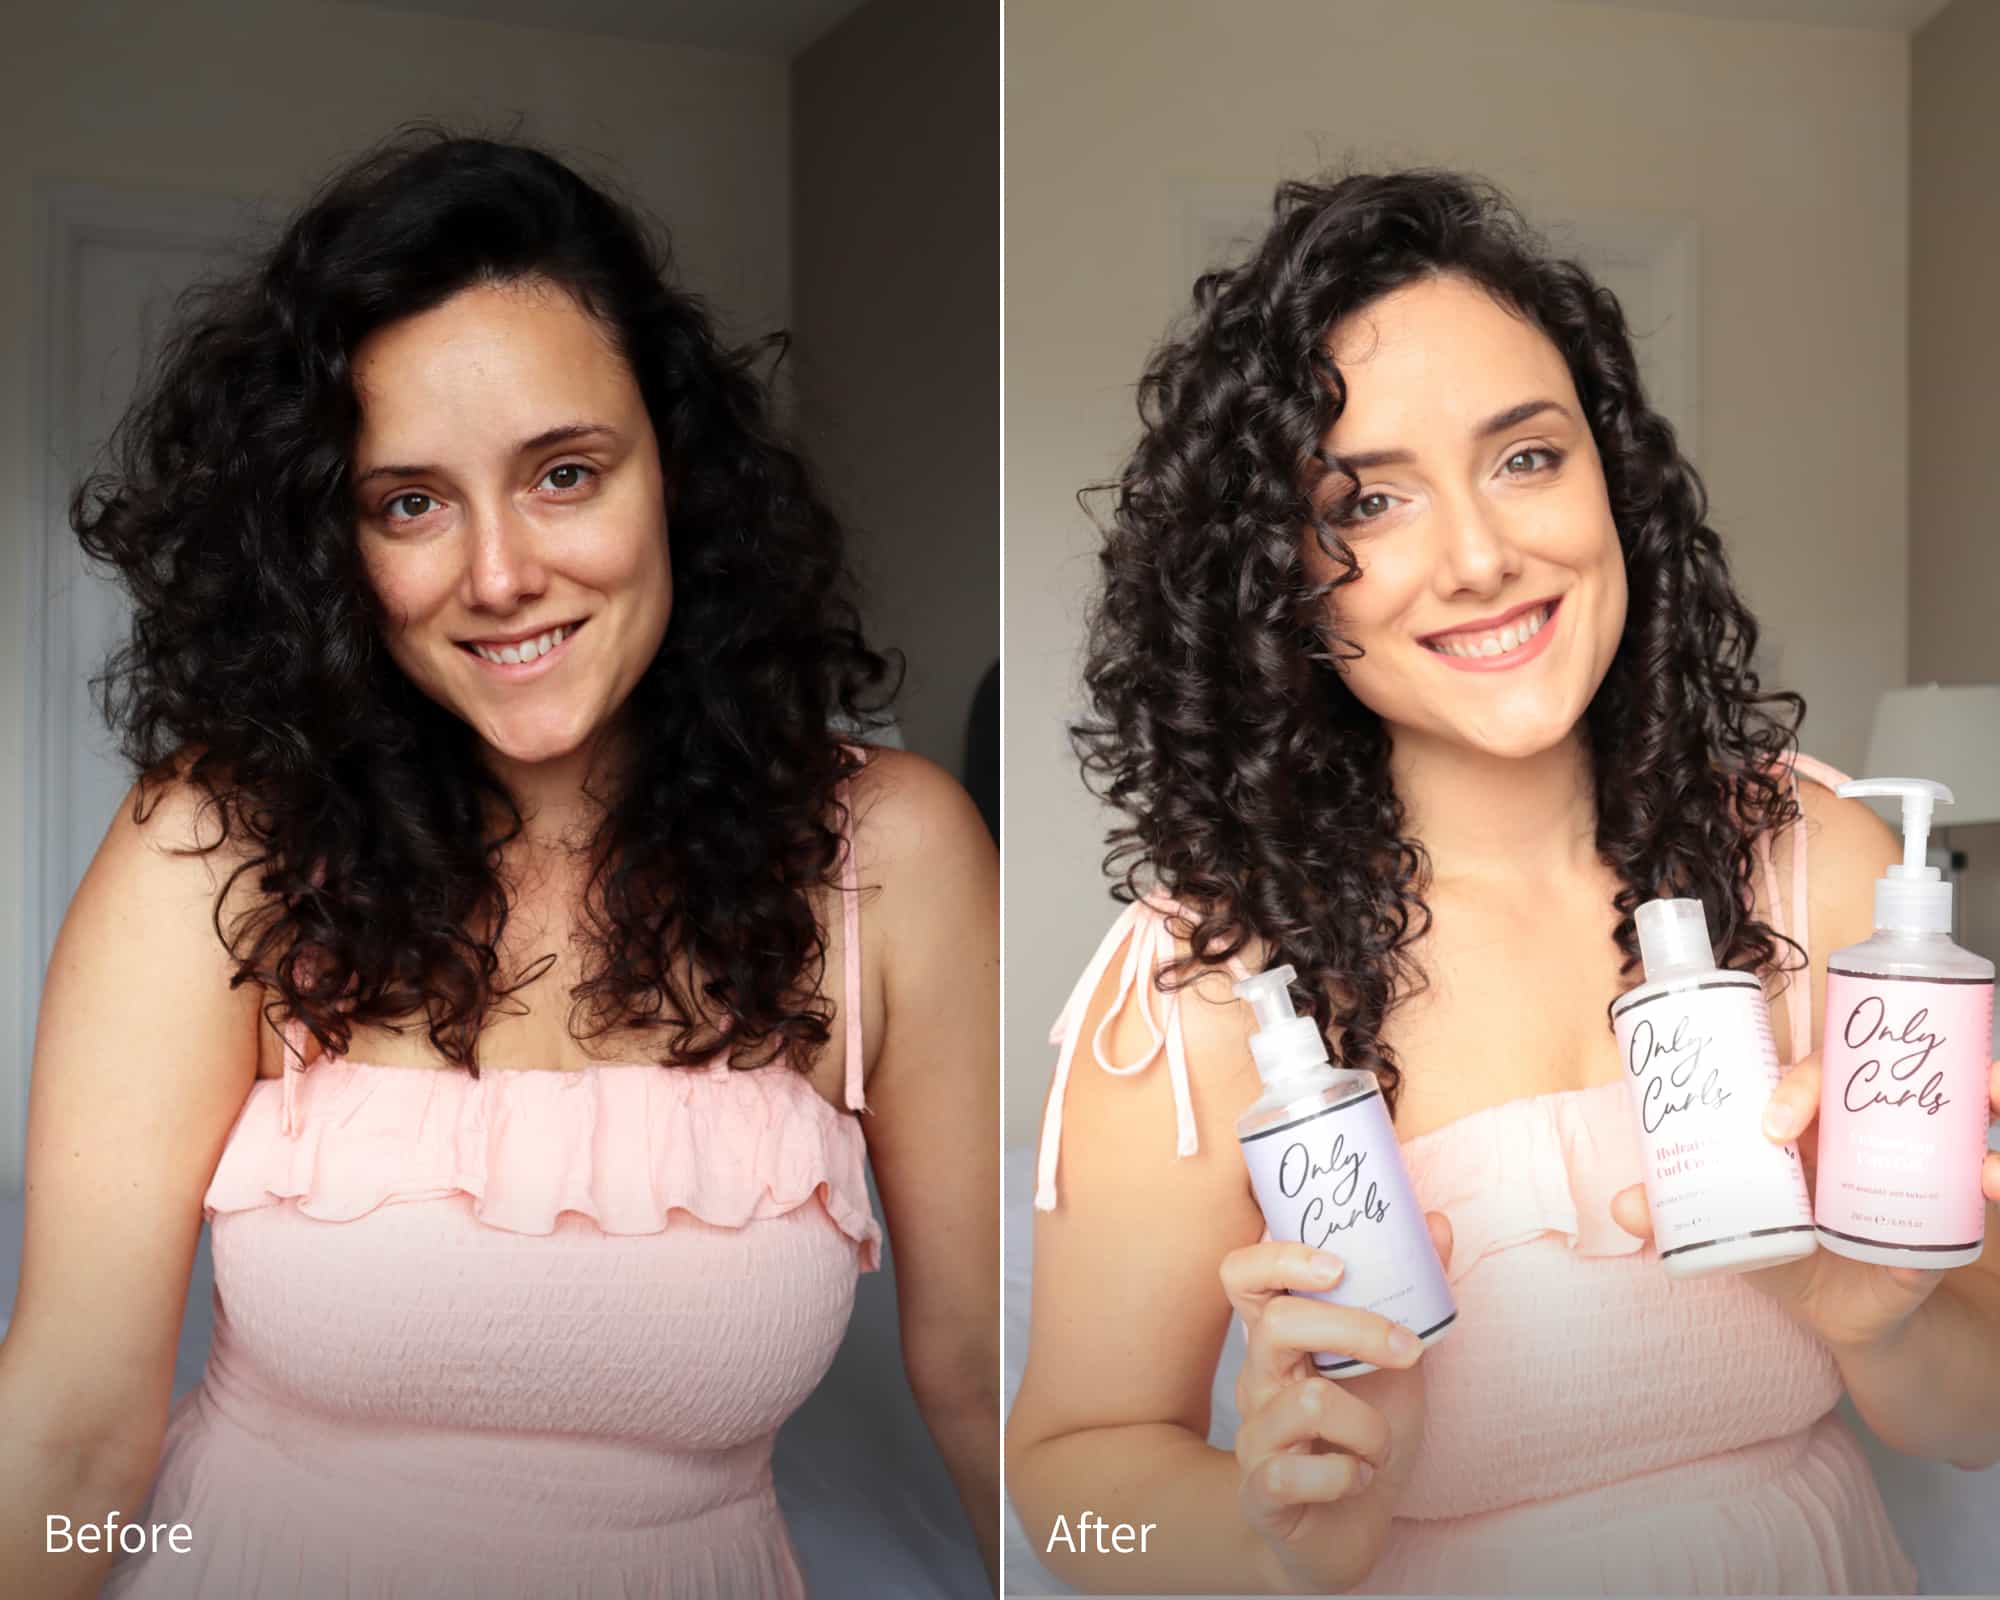 Curly Kath before and after using Only Curls to get rid of her frizz